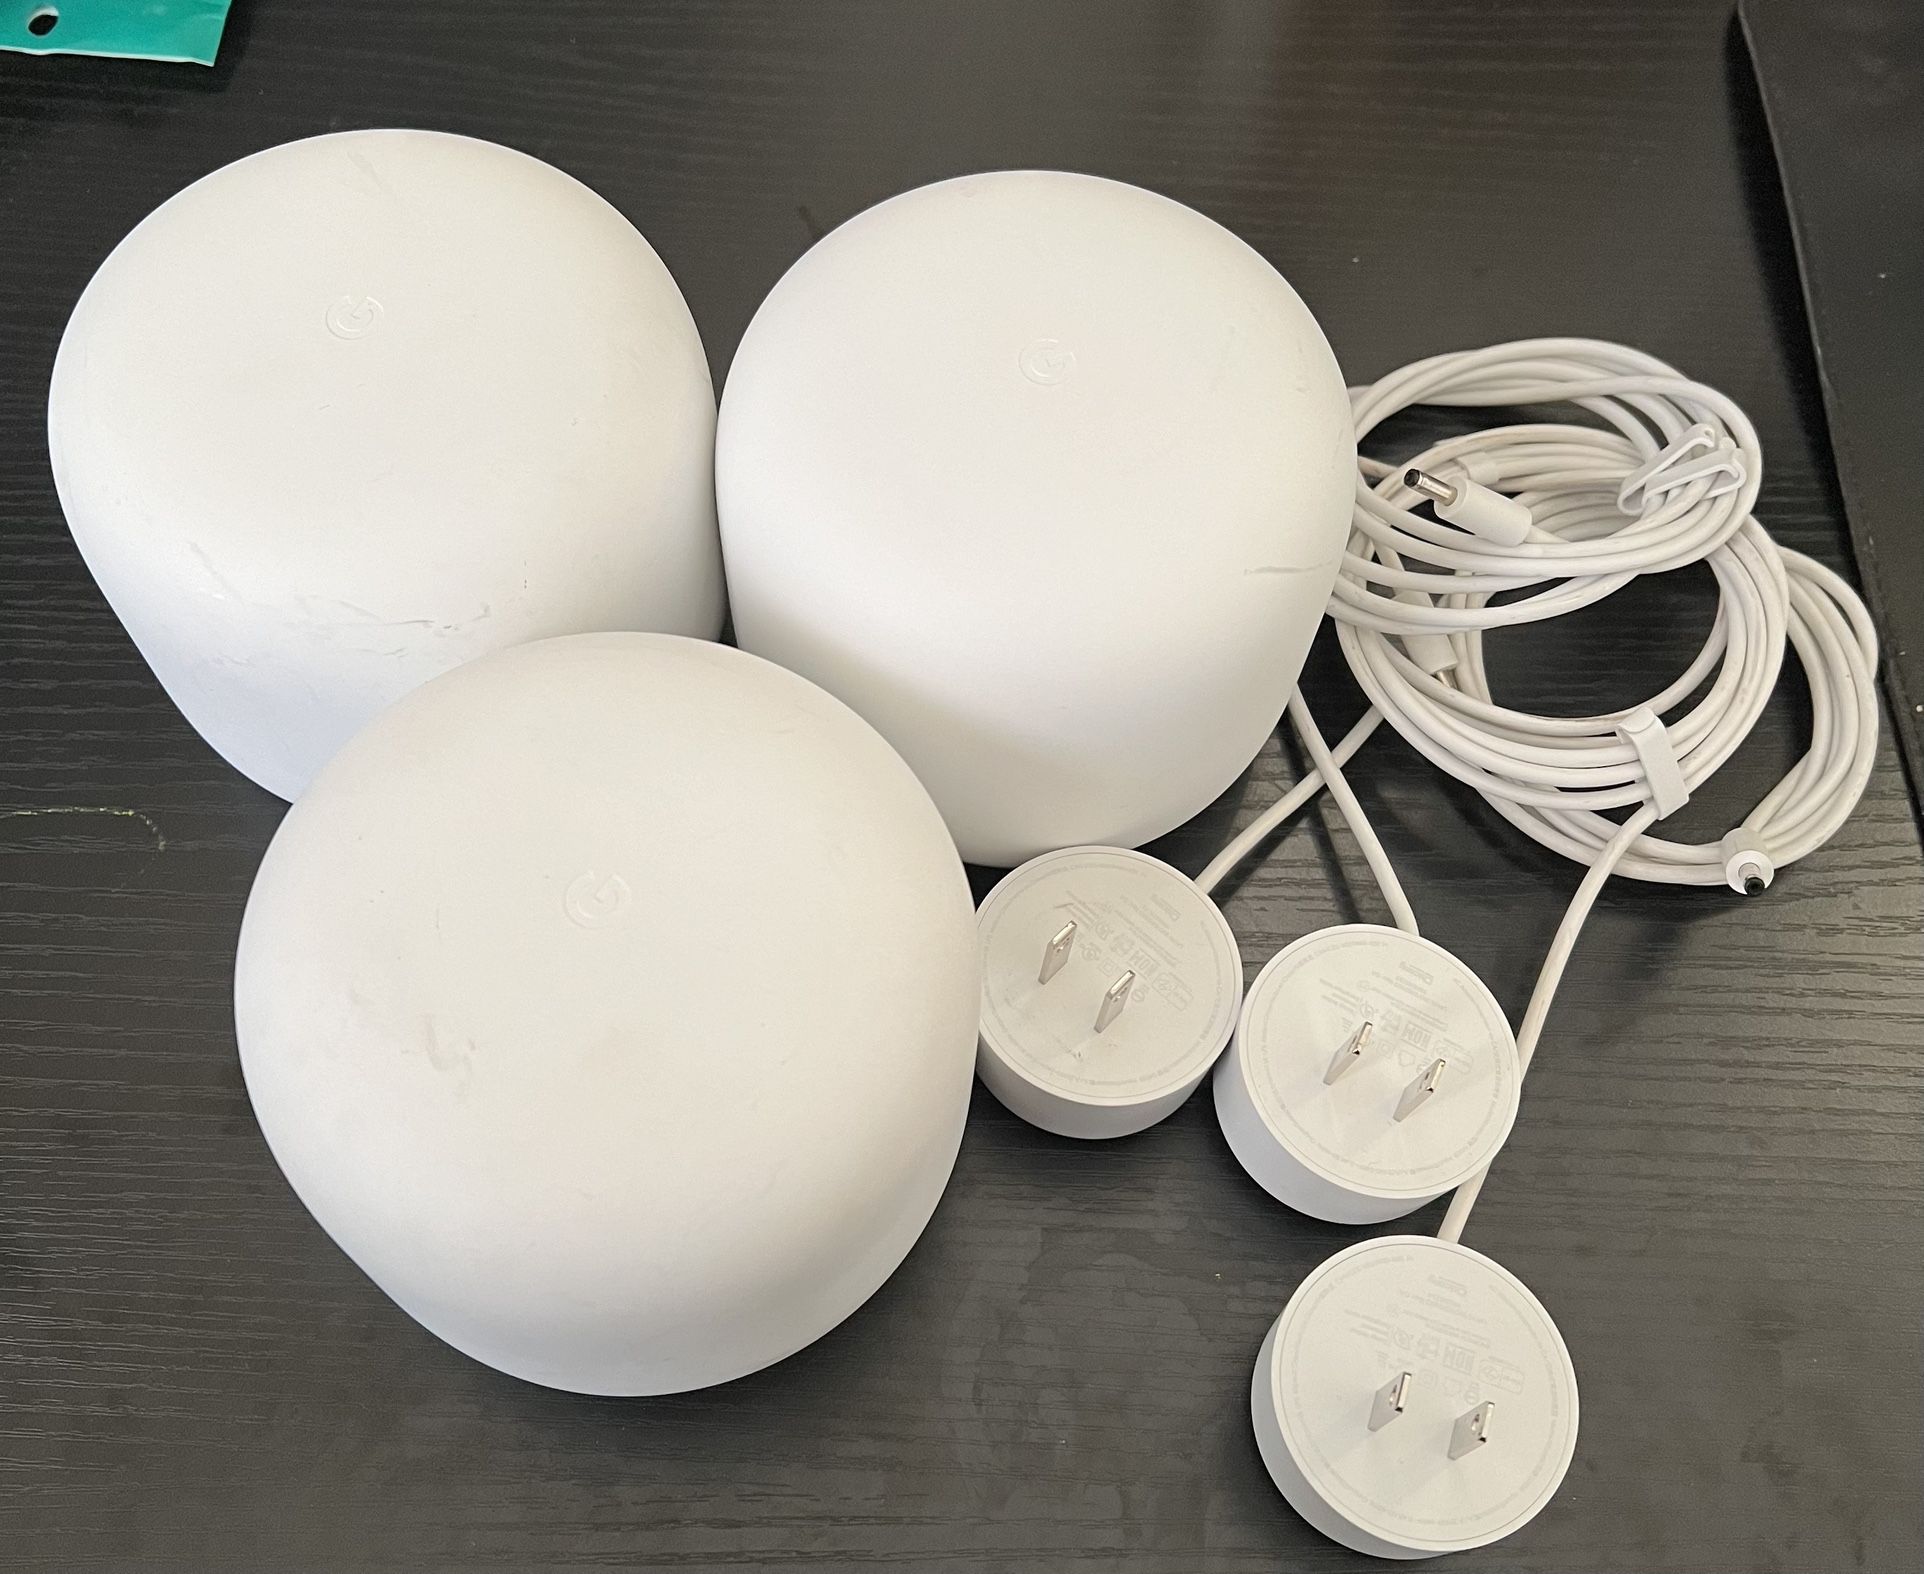 Nest Wifi Routers